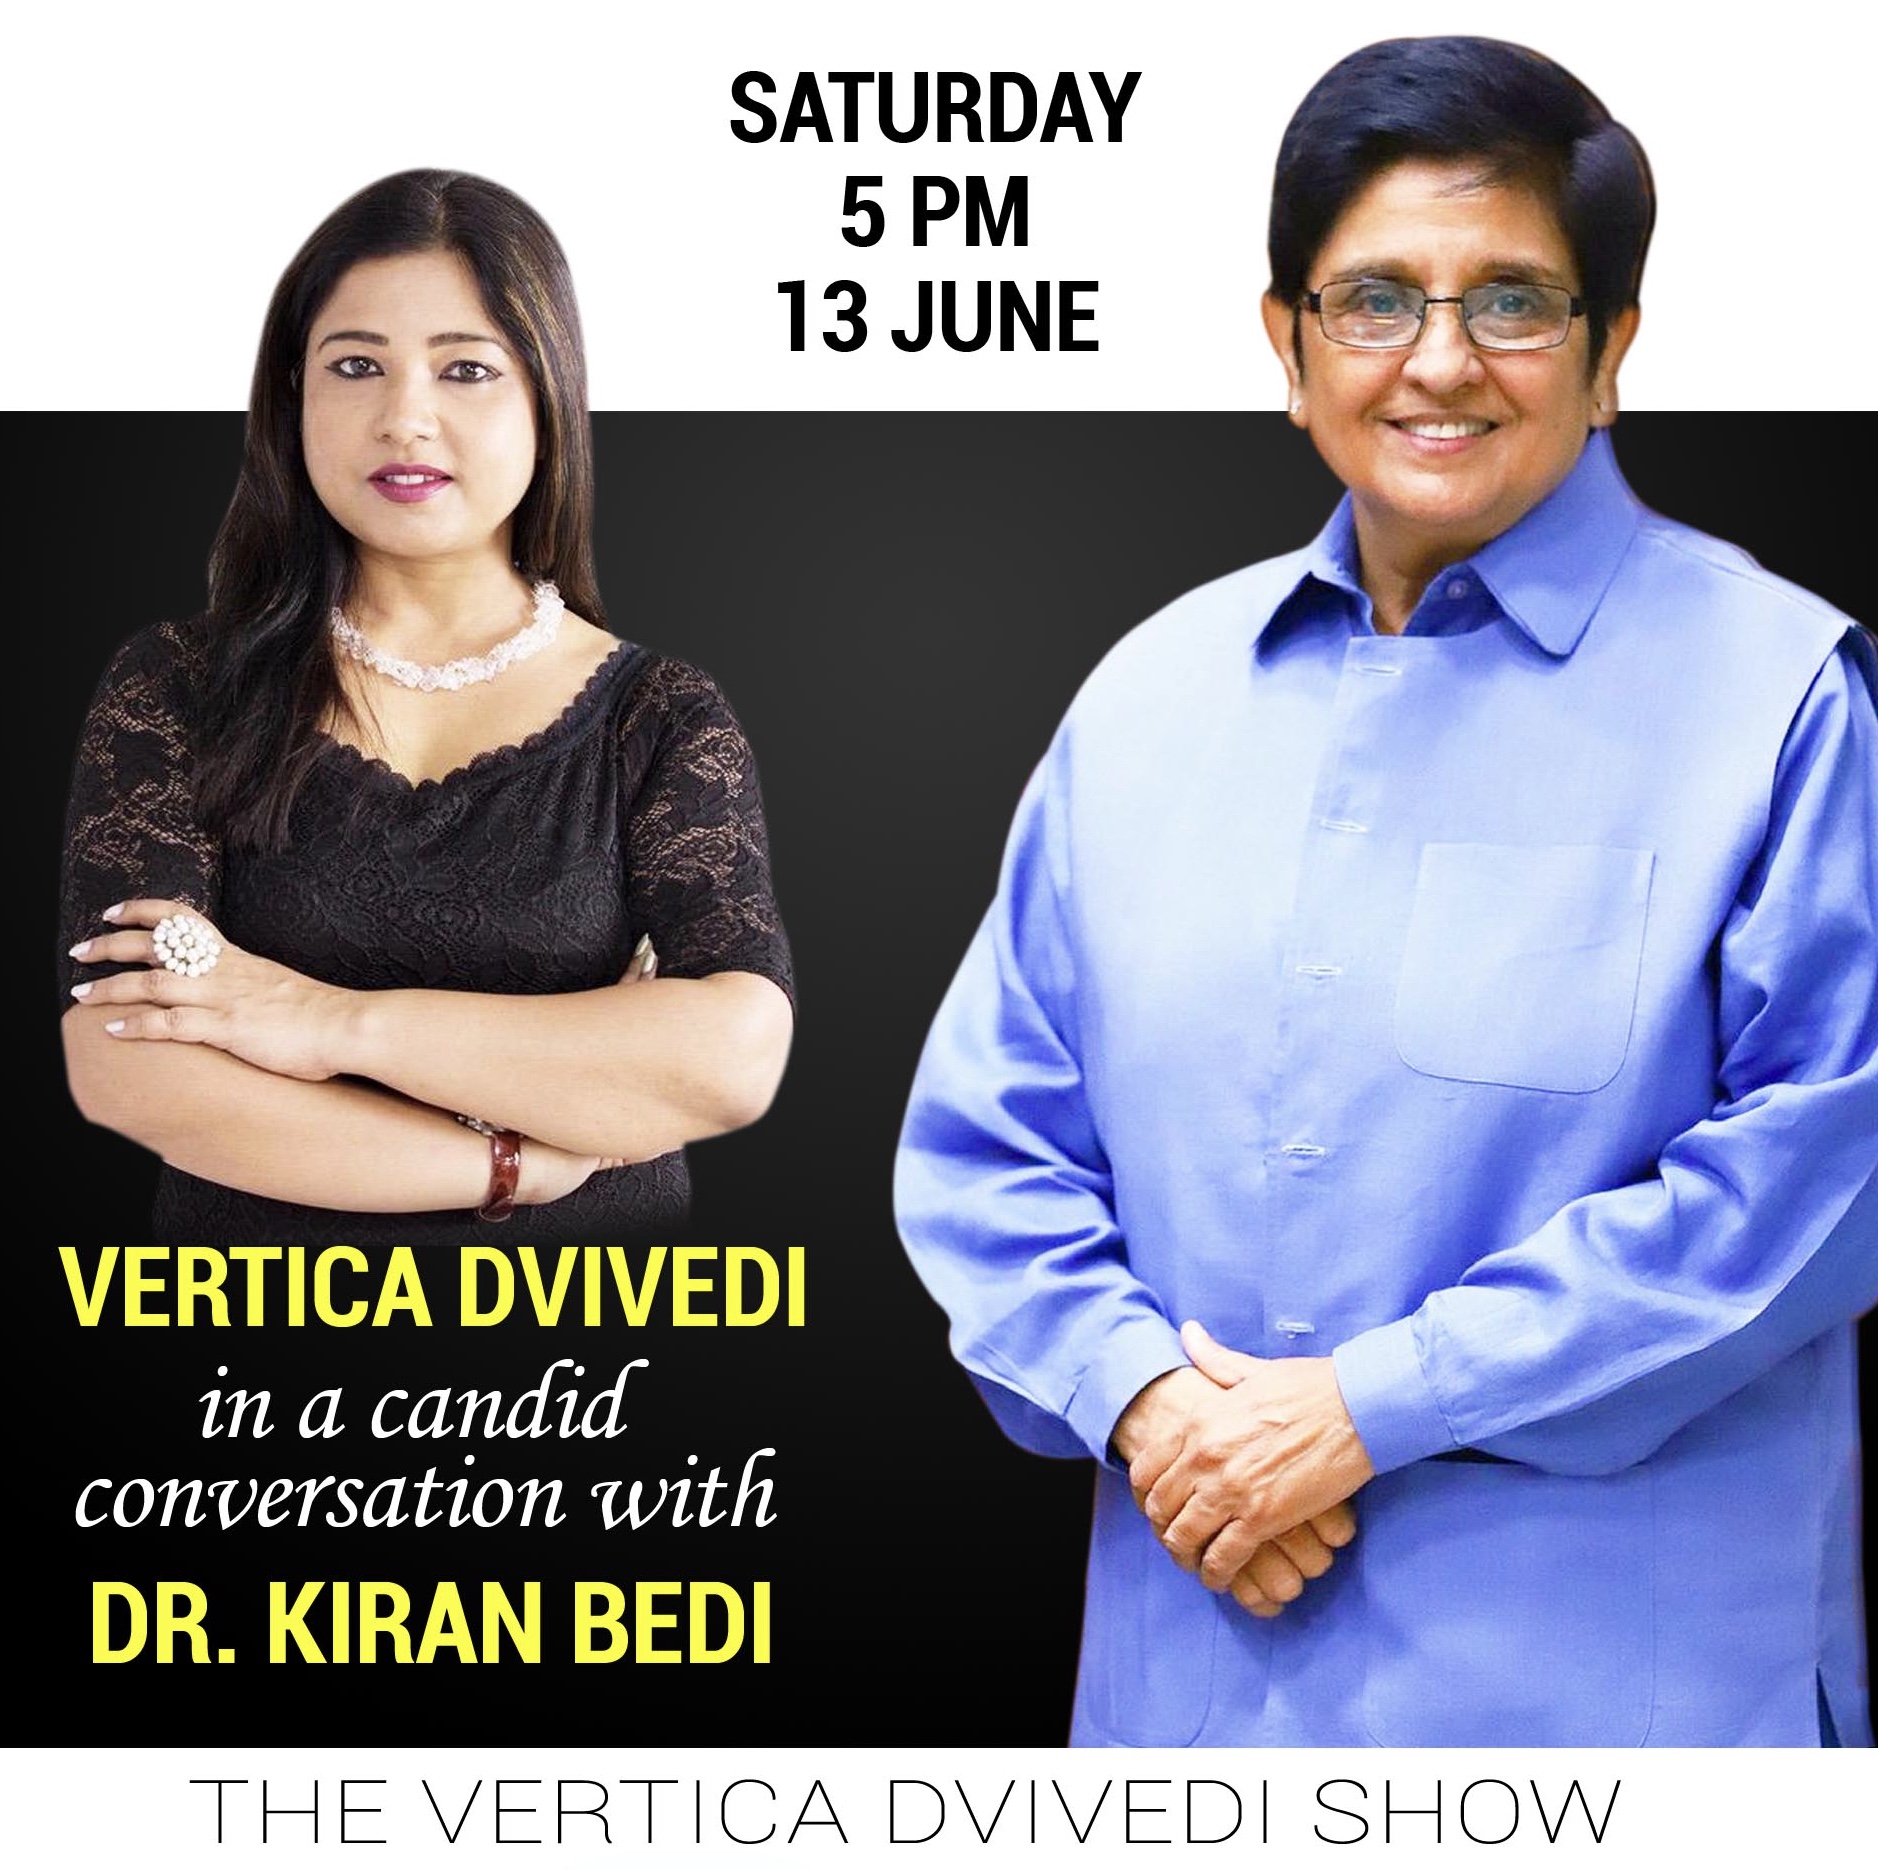 Join Vertica Dvivedi in a candid conversation with Dr KIRAN BEDI - Sat/ 13 June/ 5 PM